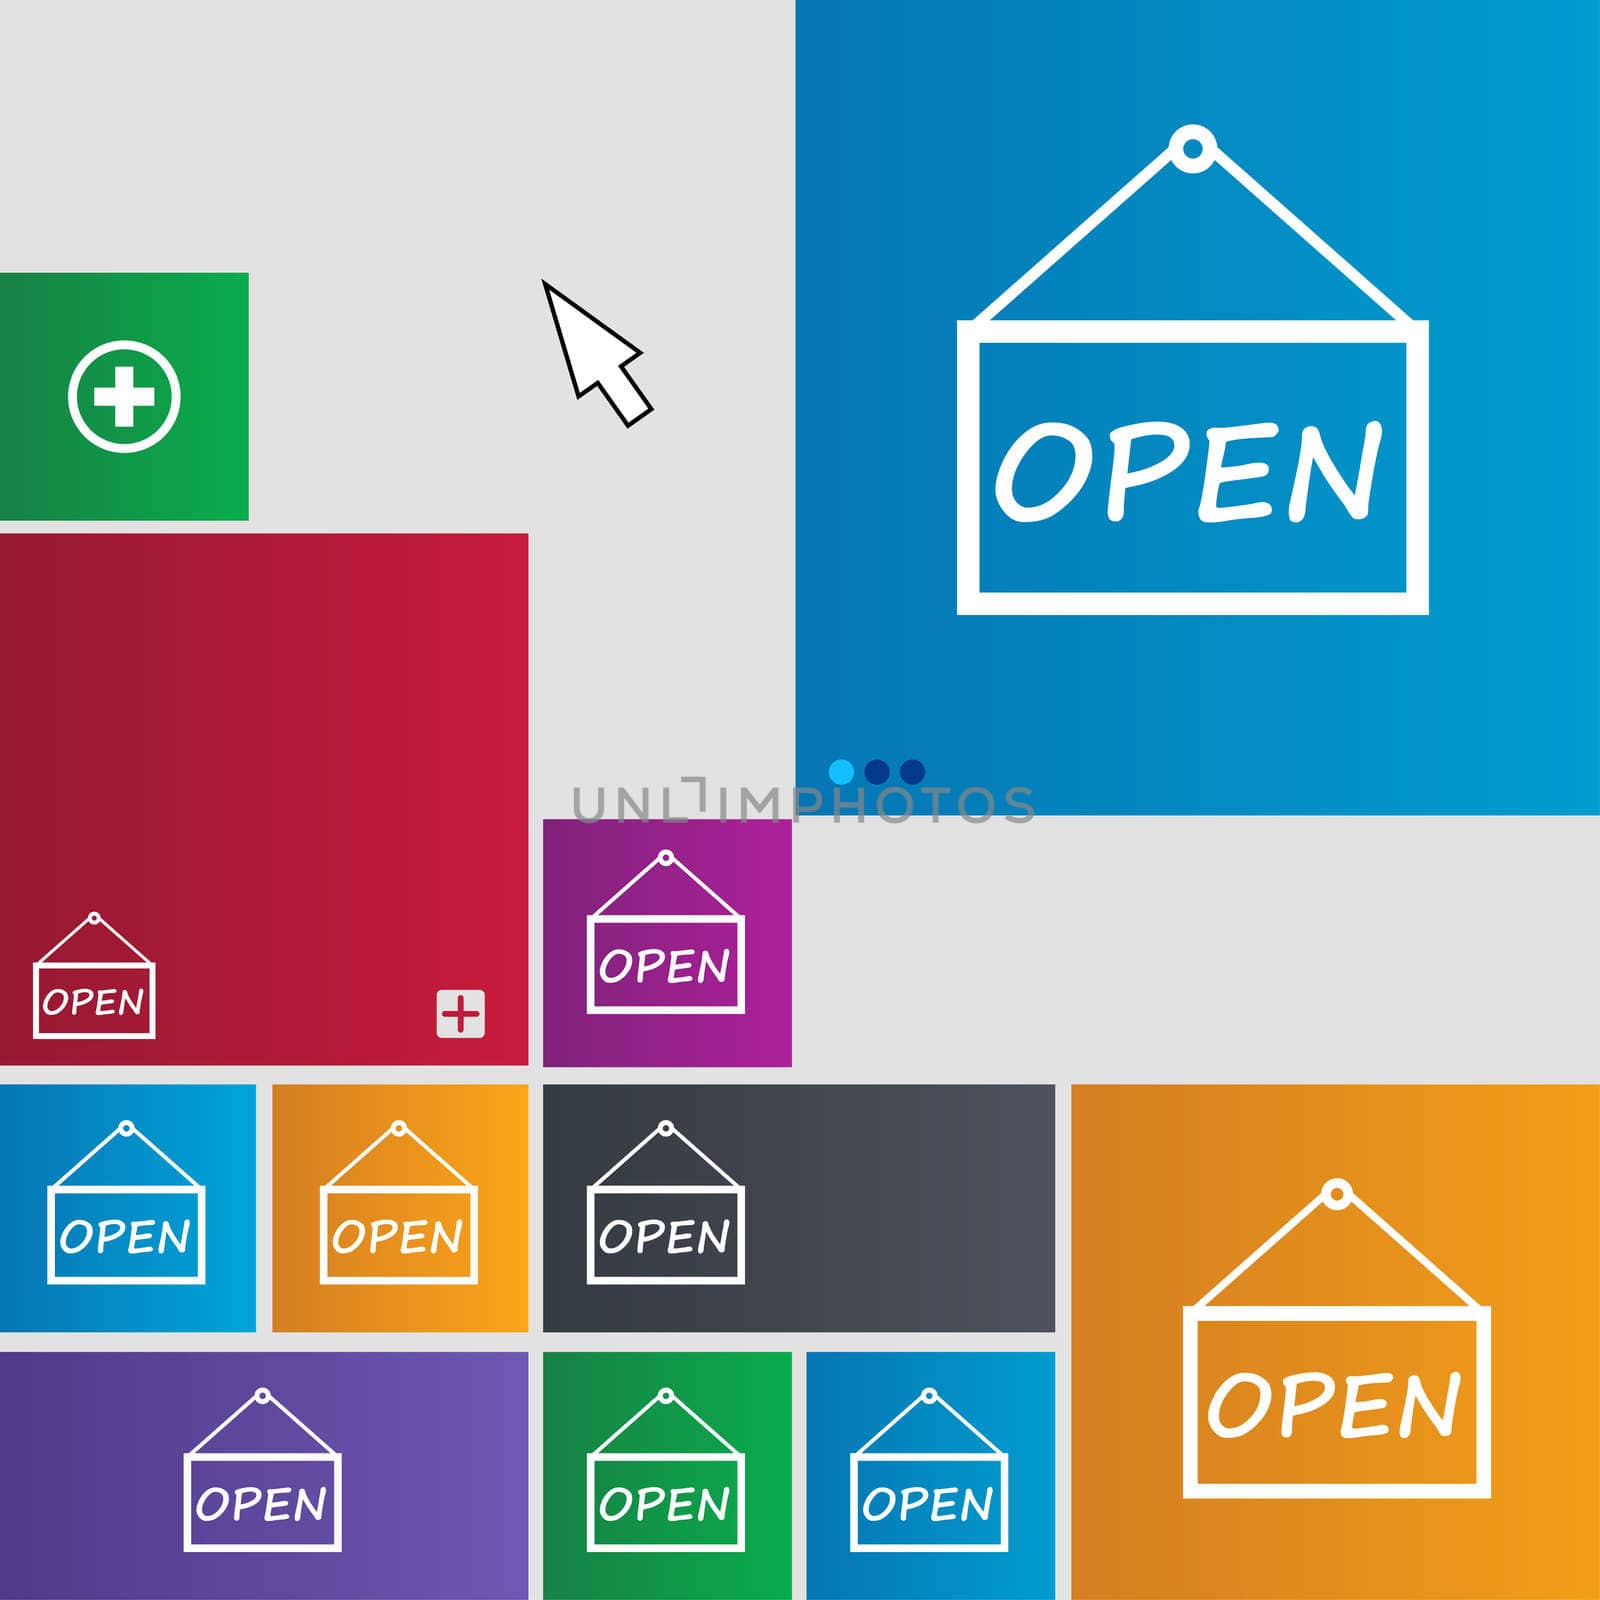 open icon sign. Metro style buttons. Modern interface website buttons with cursor pointer. illustration